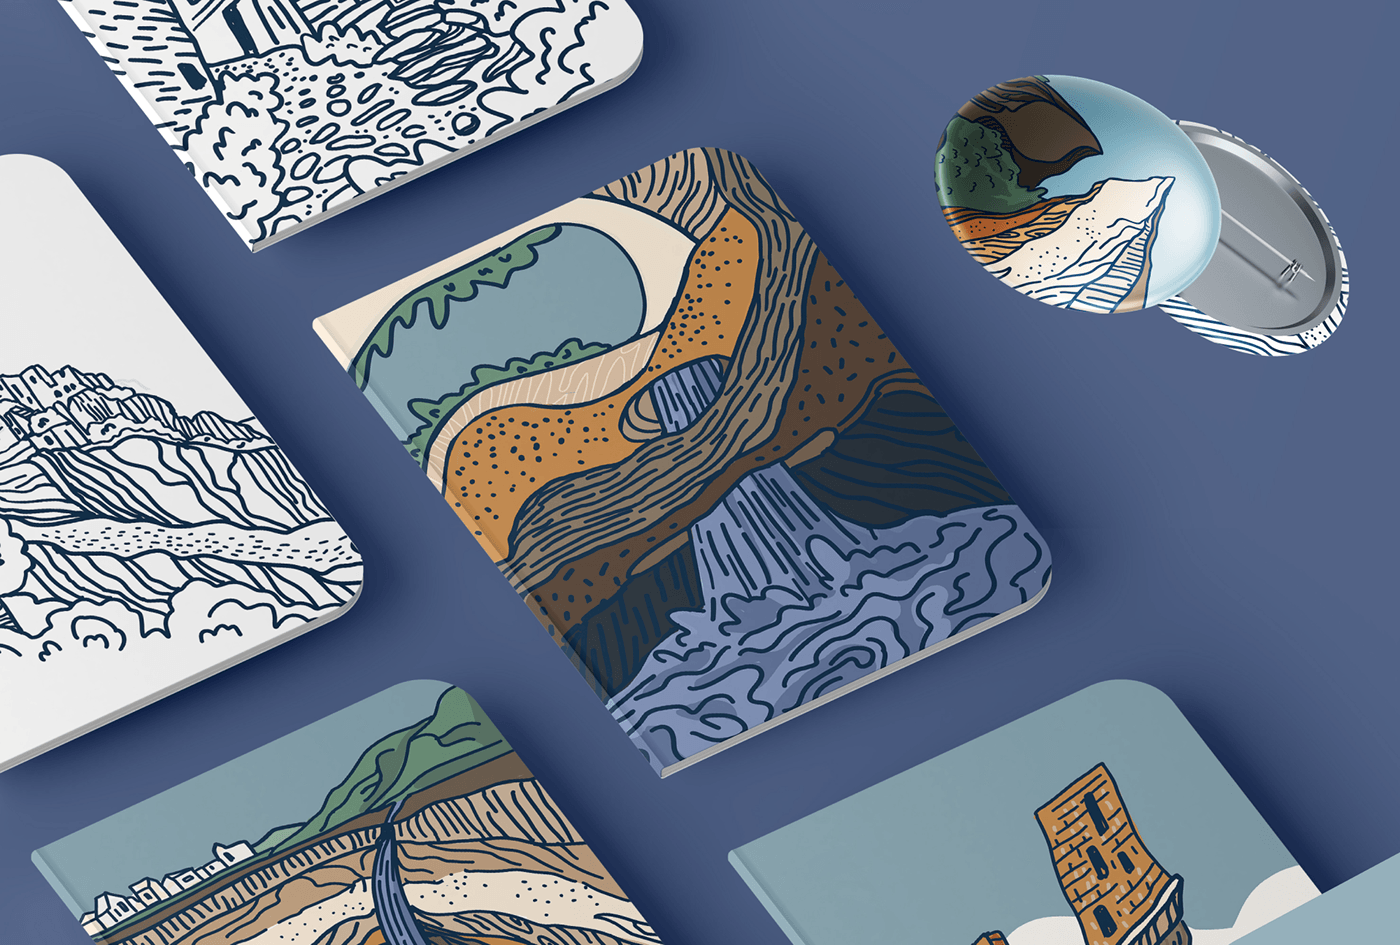 design of printed materials and pin icons depicting mountains, waterfalls, caves
